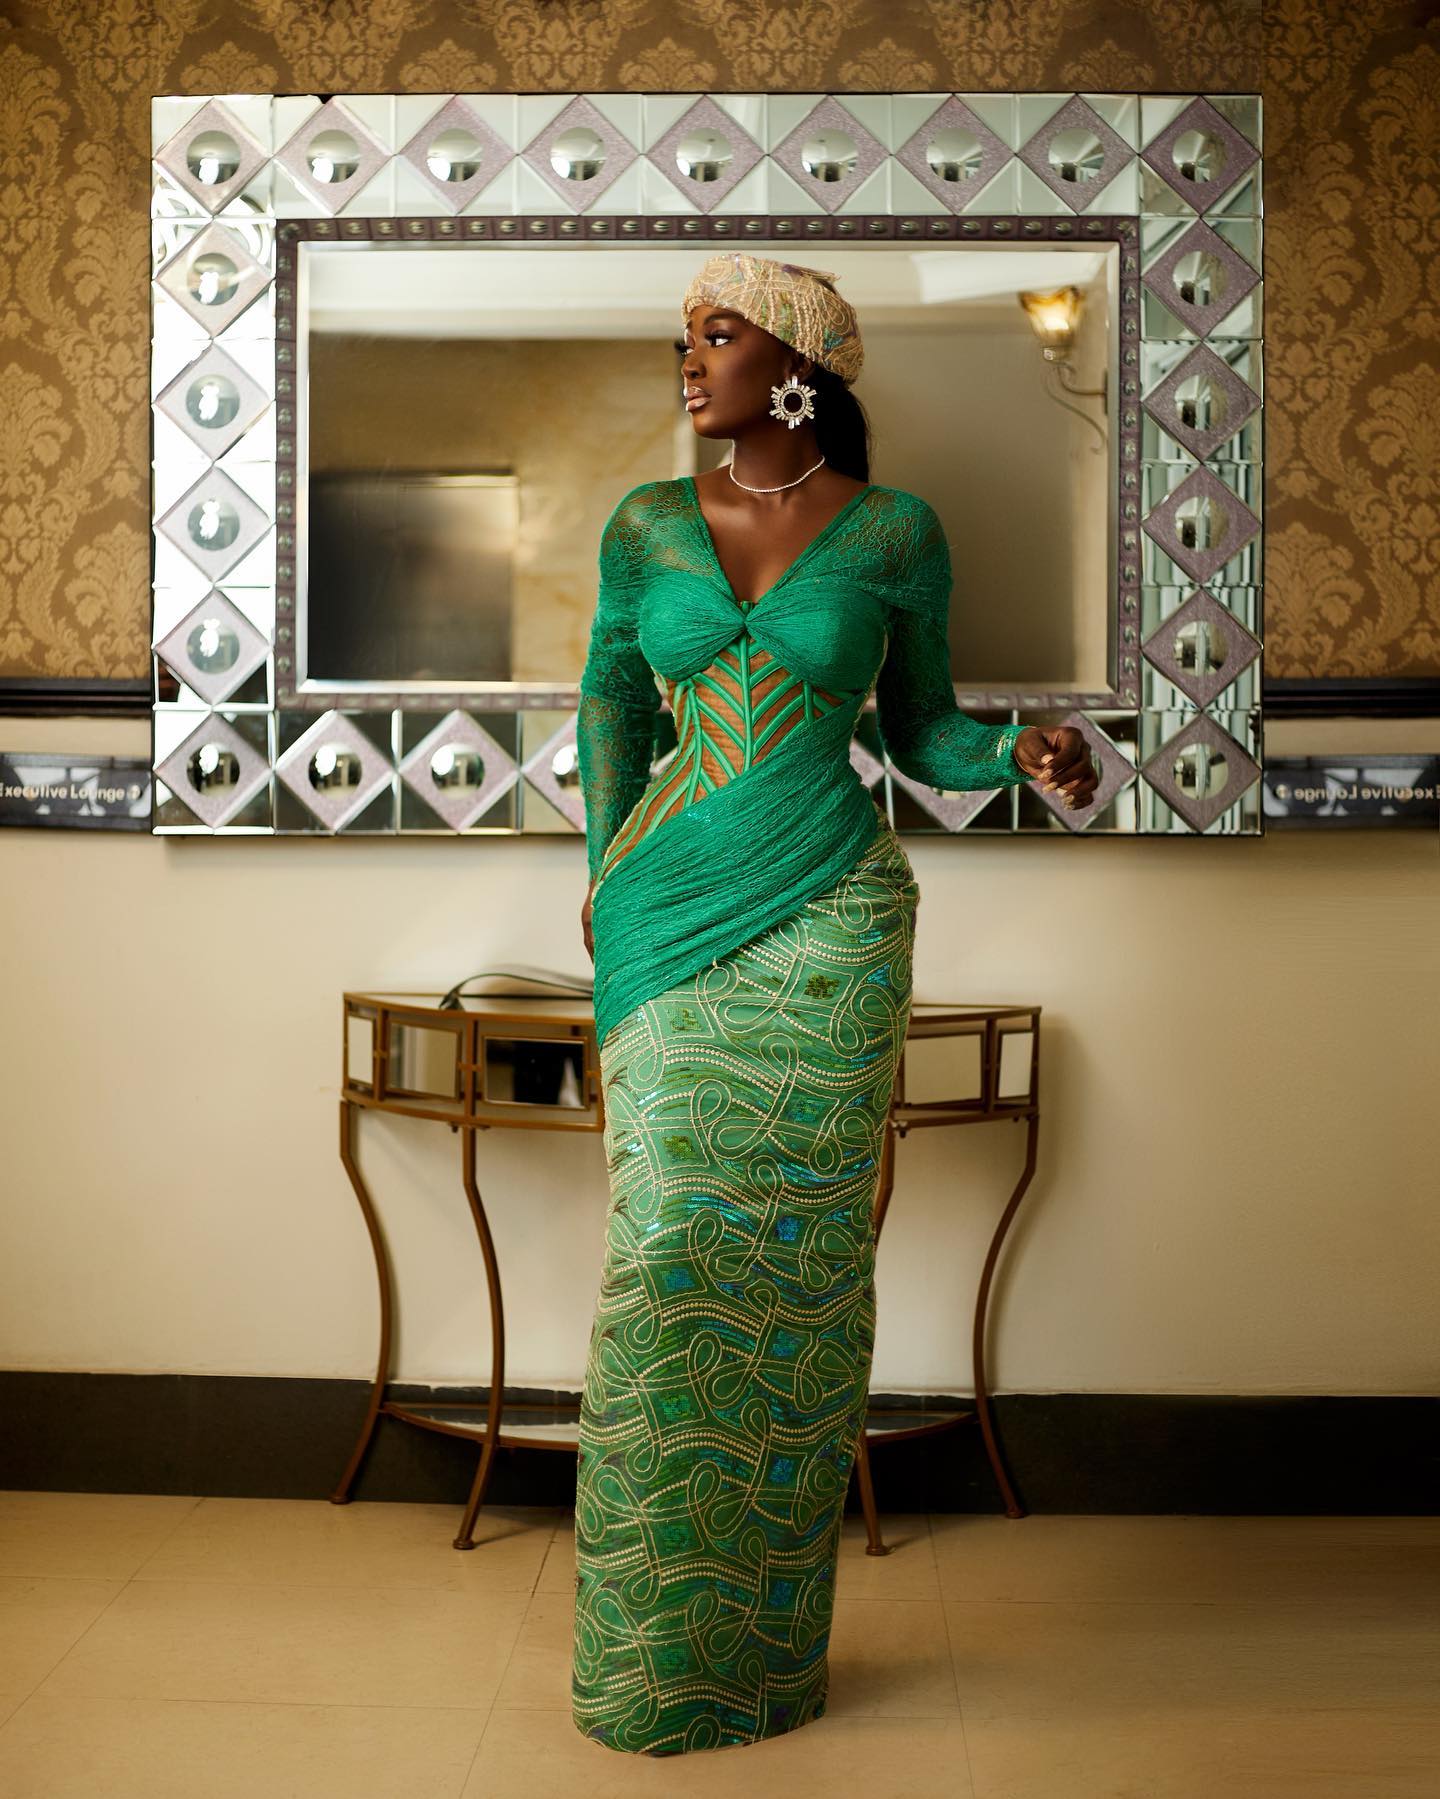 Tolu Bally- Rocking An Exquisite Look For Any Fancy Event